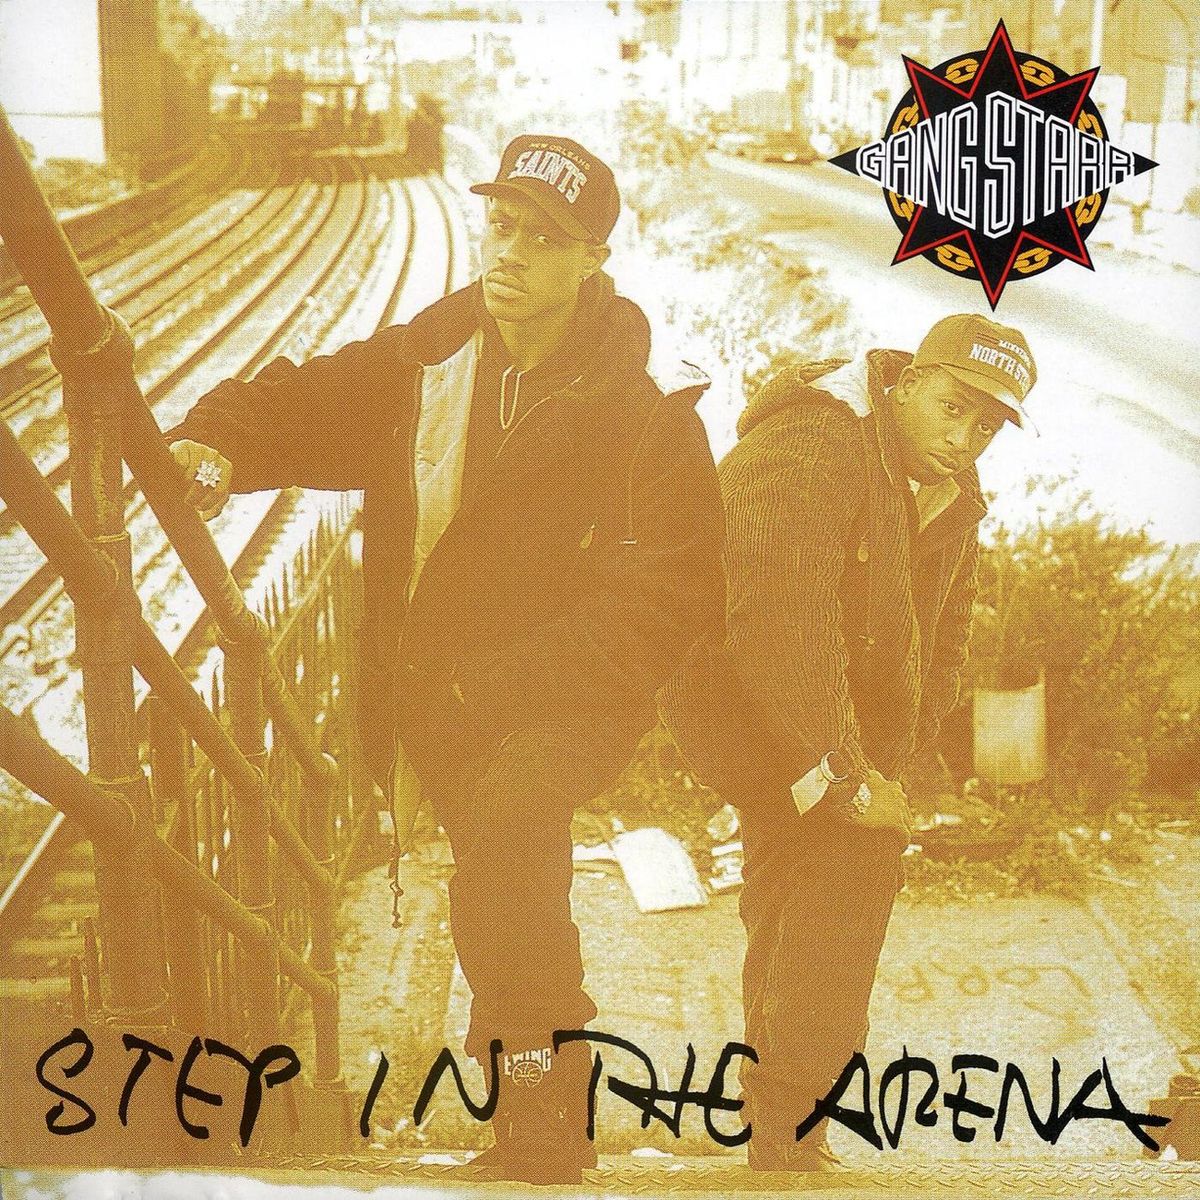 Art for Take a Rest by Gang Starr